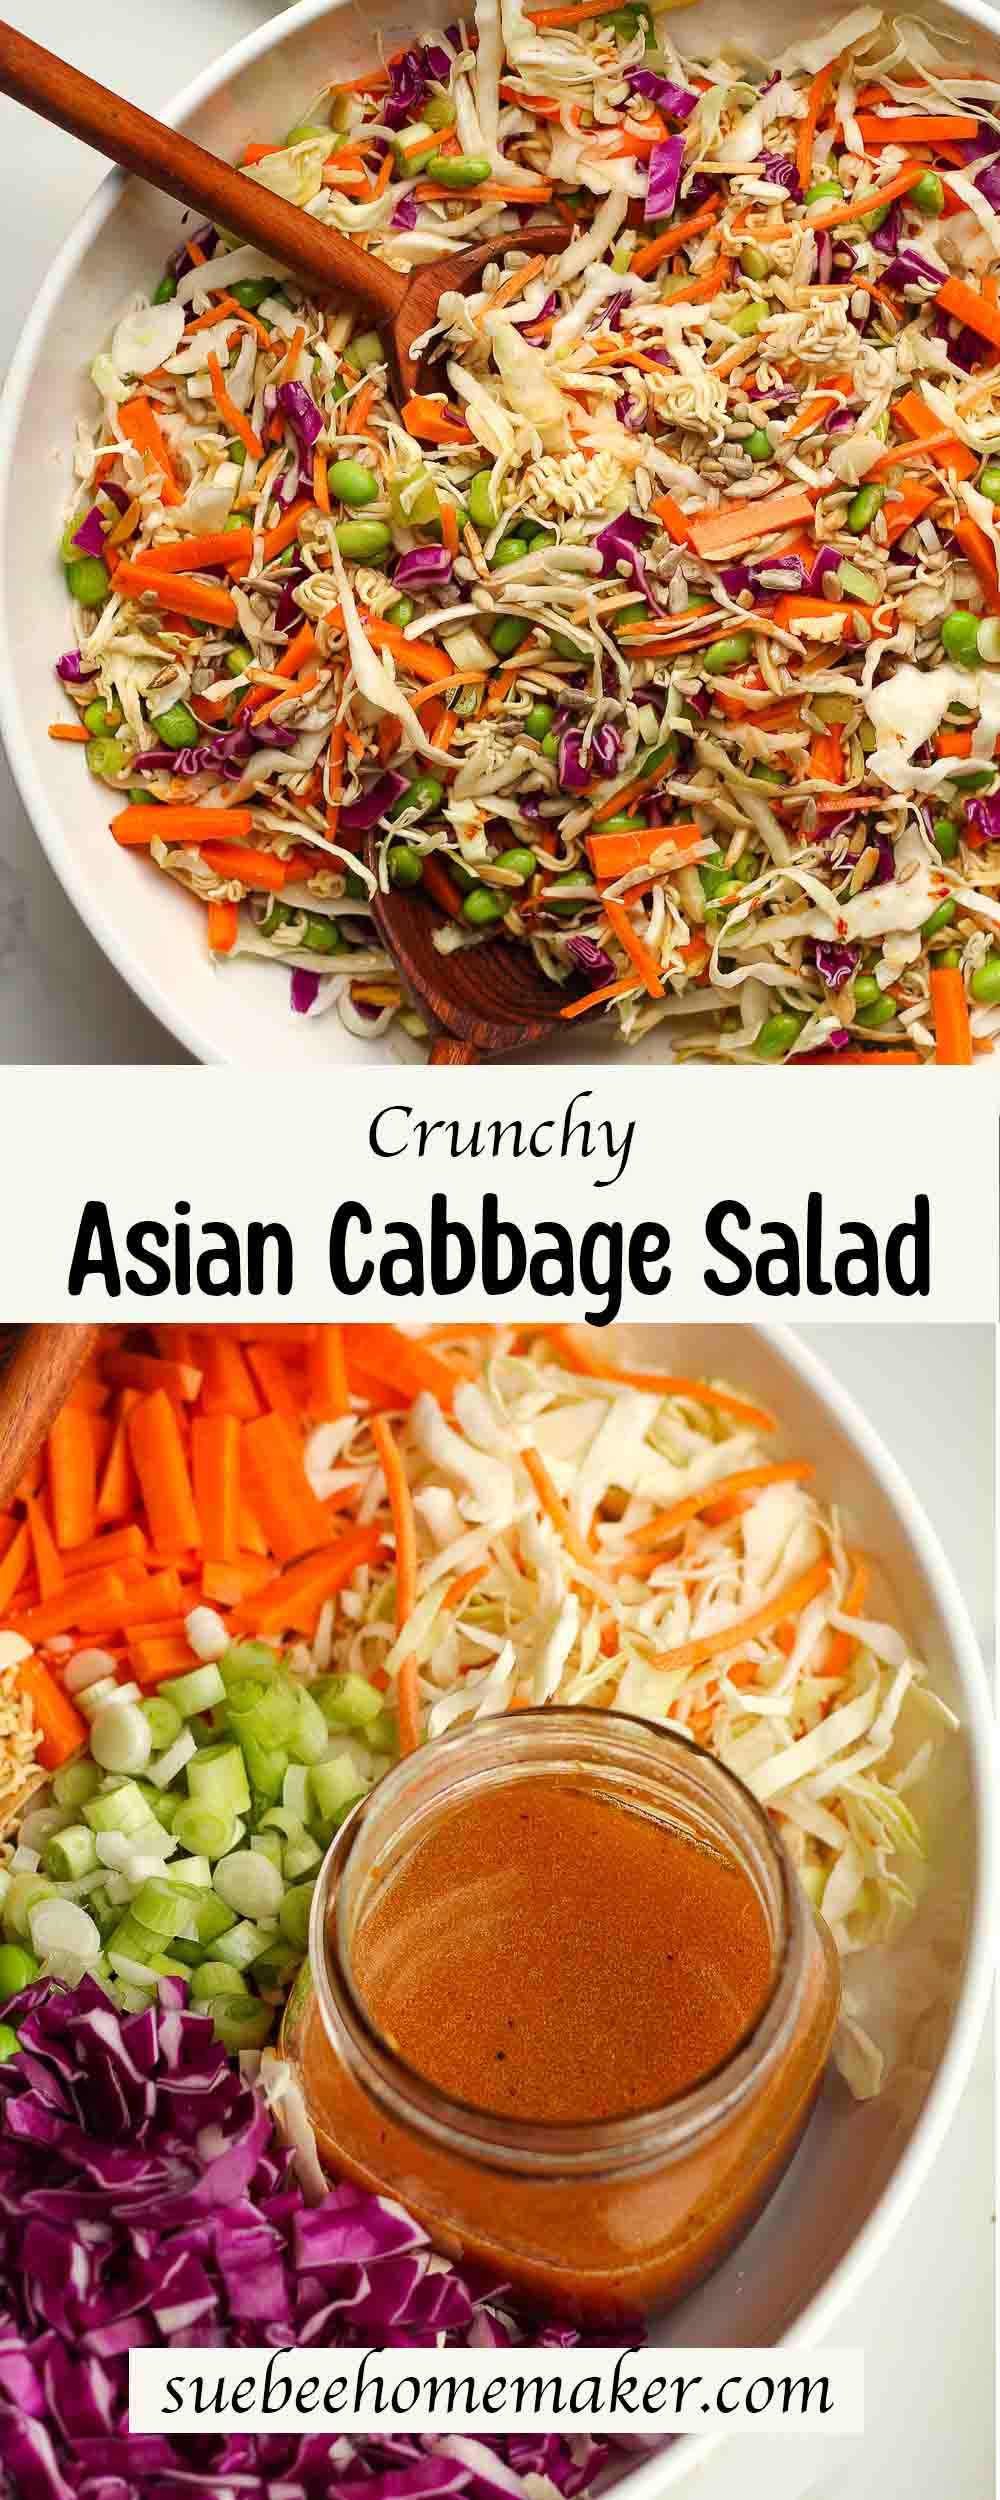 A collage of two photos of crunchy Asian cabbage salad.